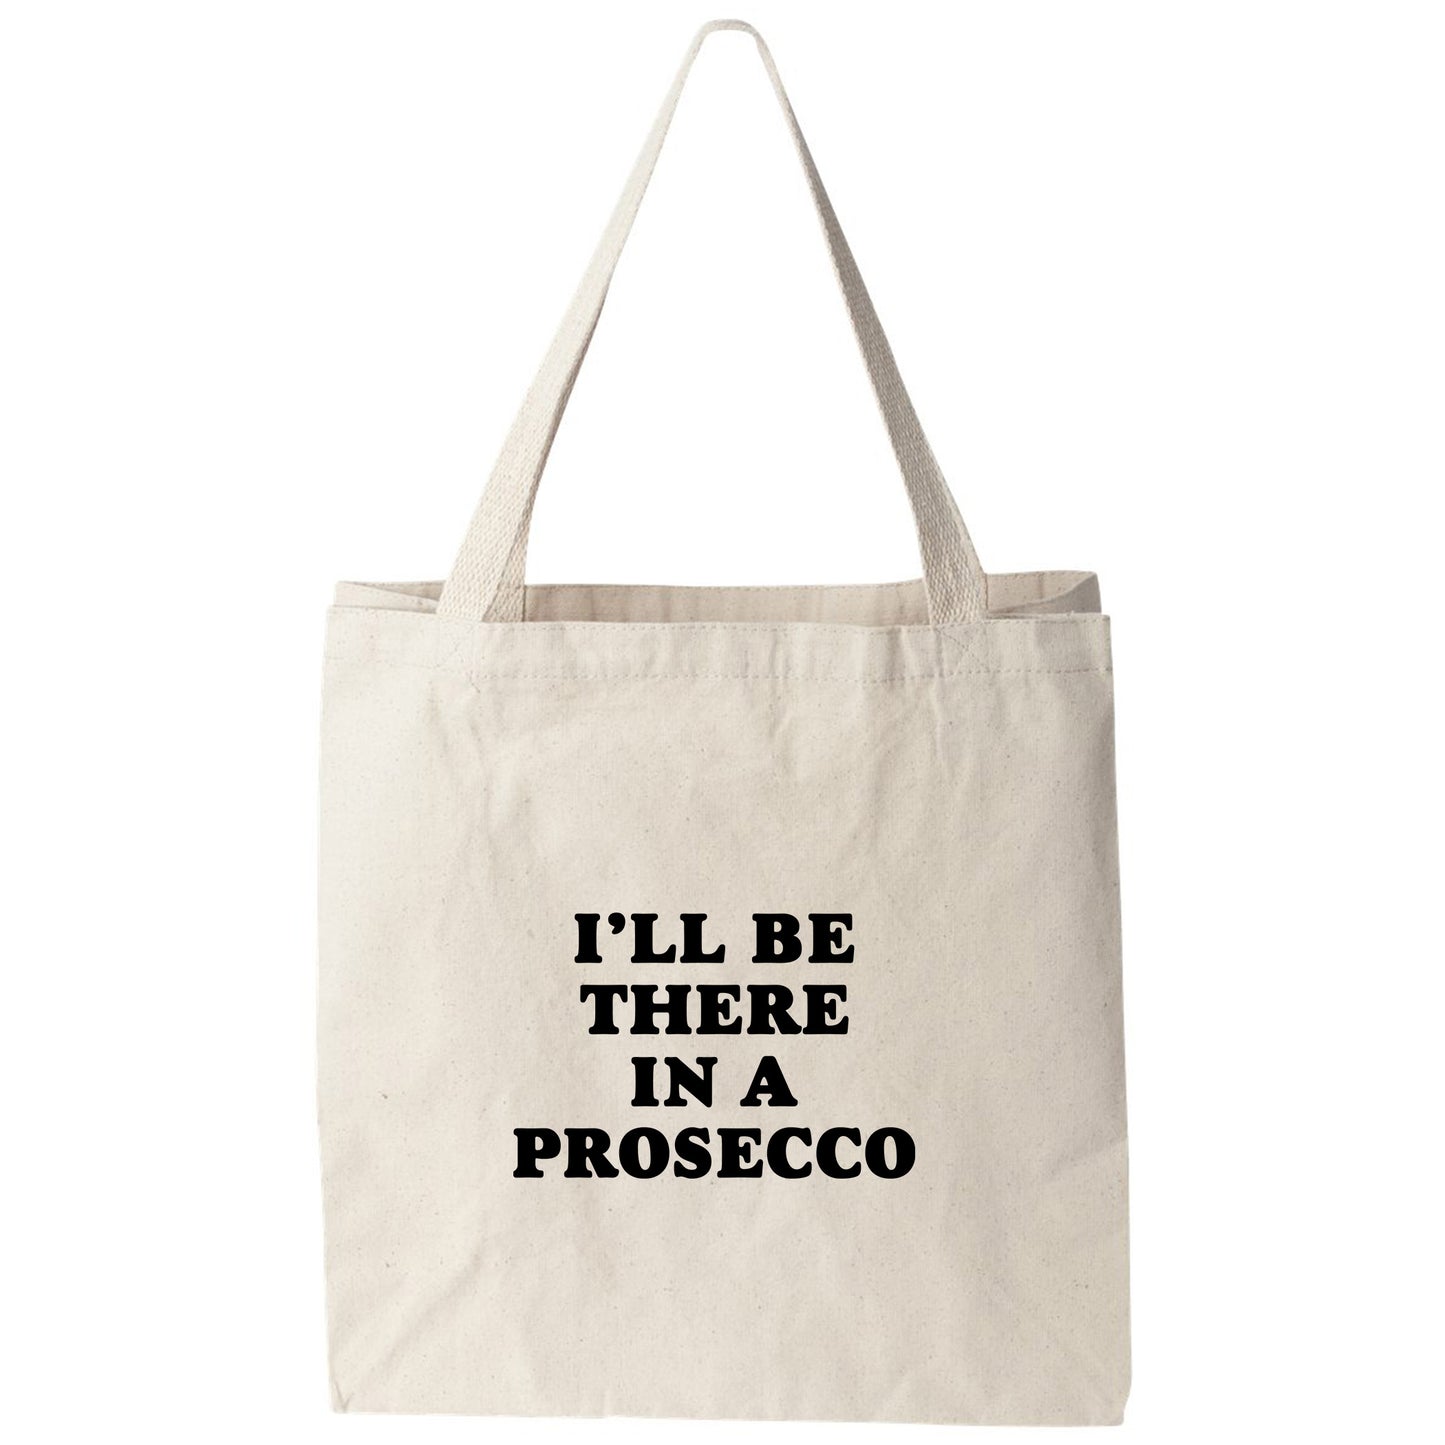 a tote bag that says i'll be there in a prosecco